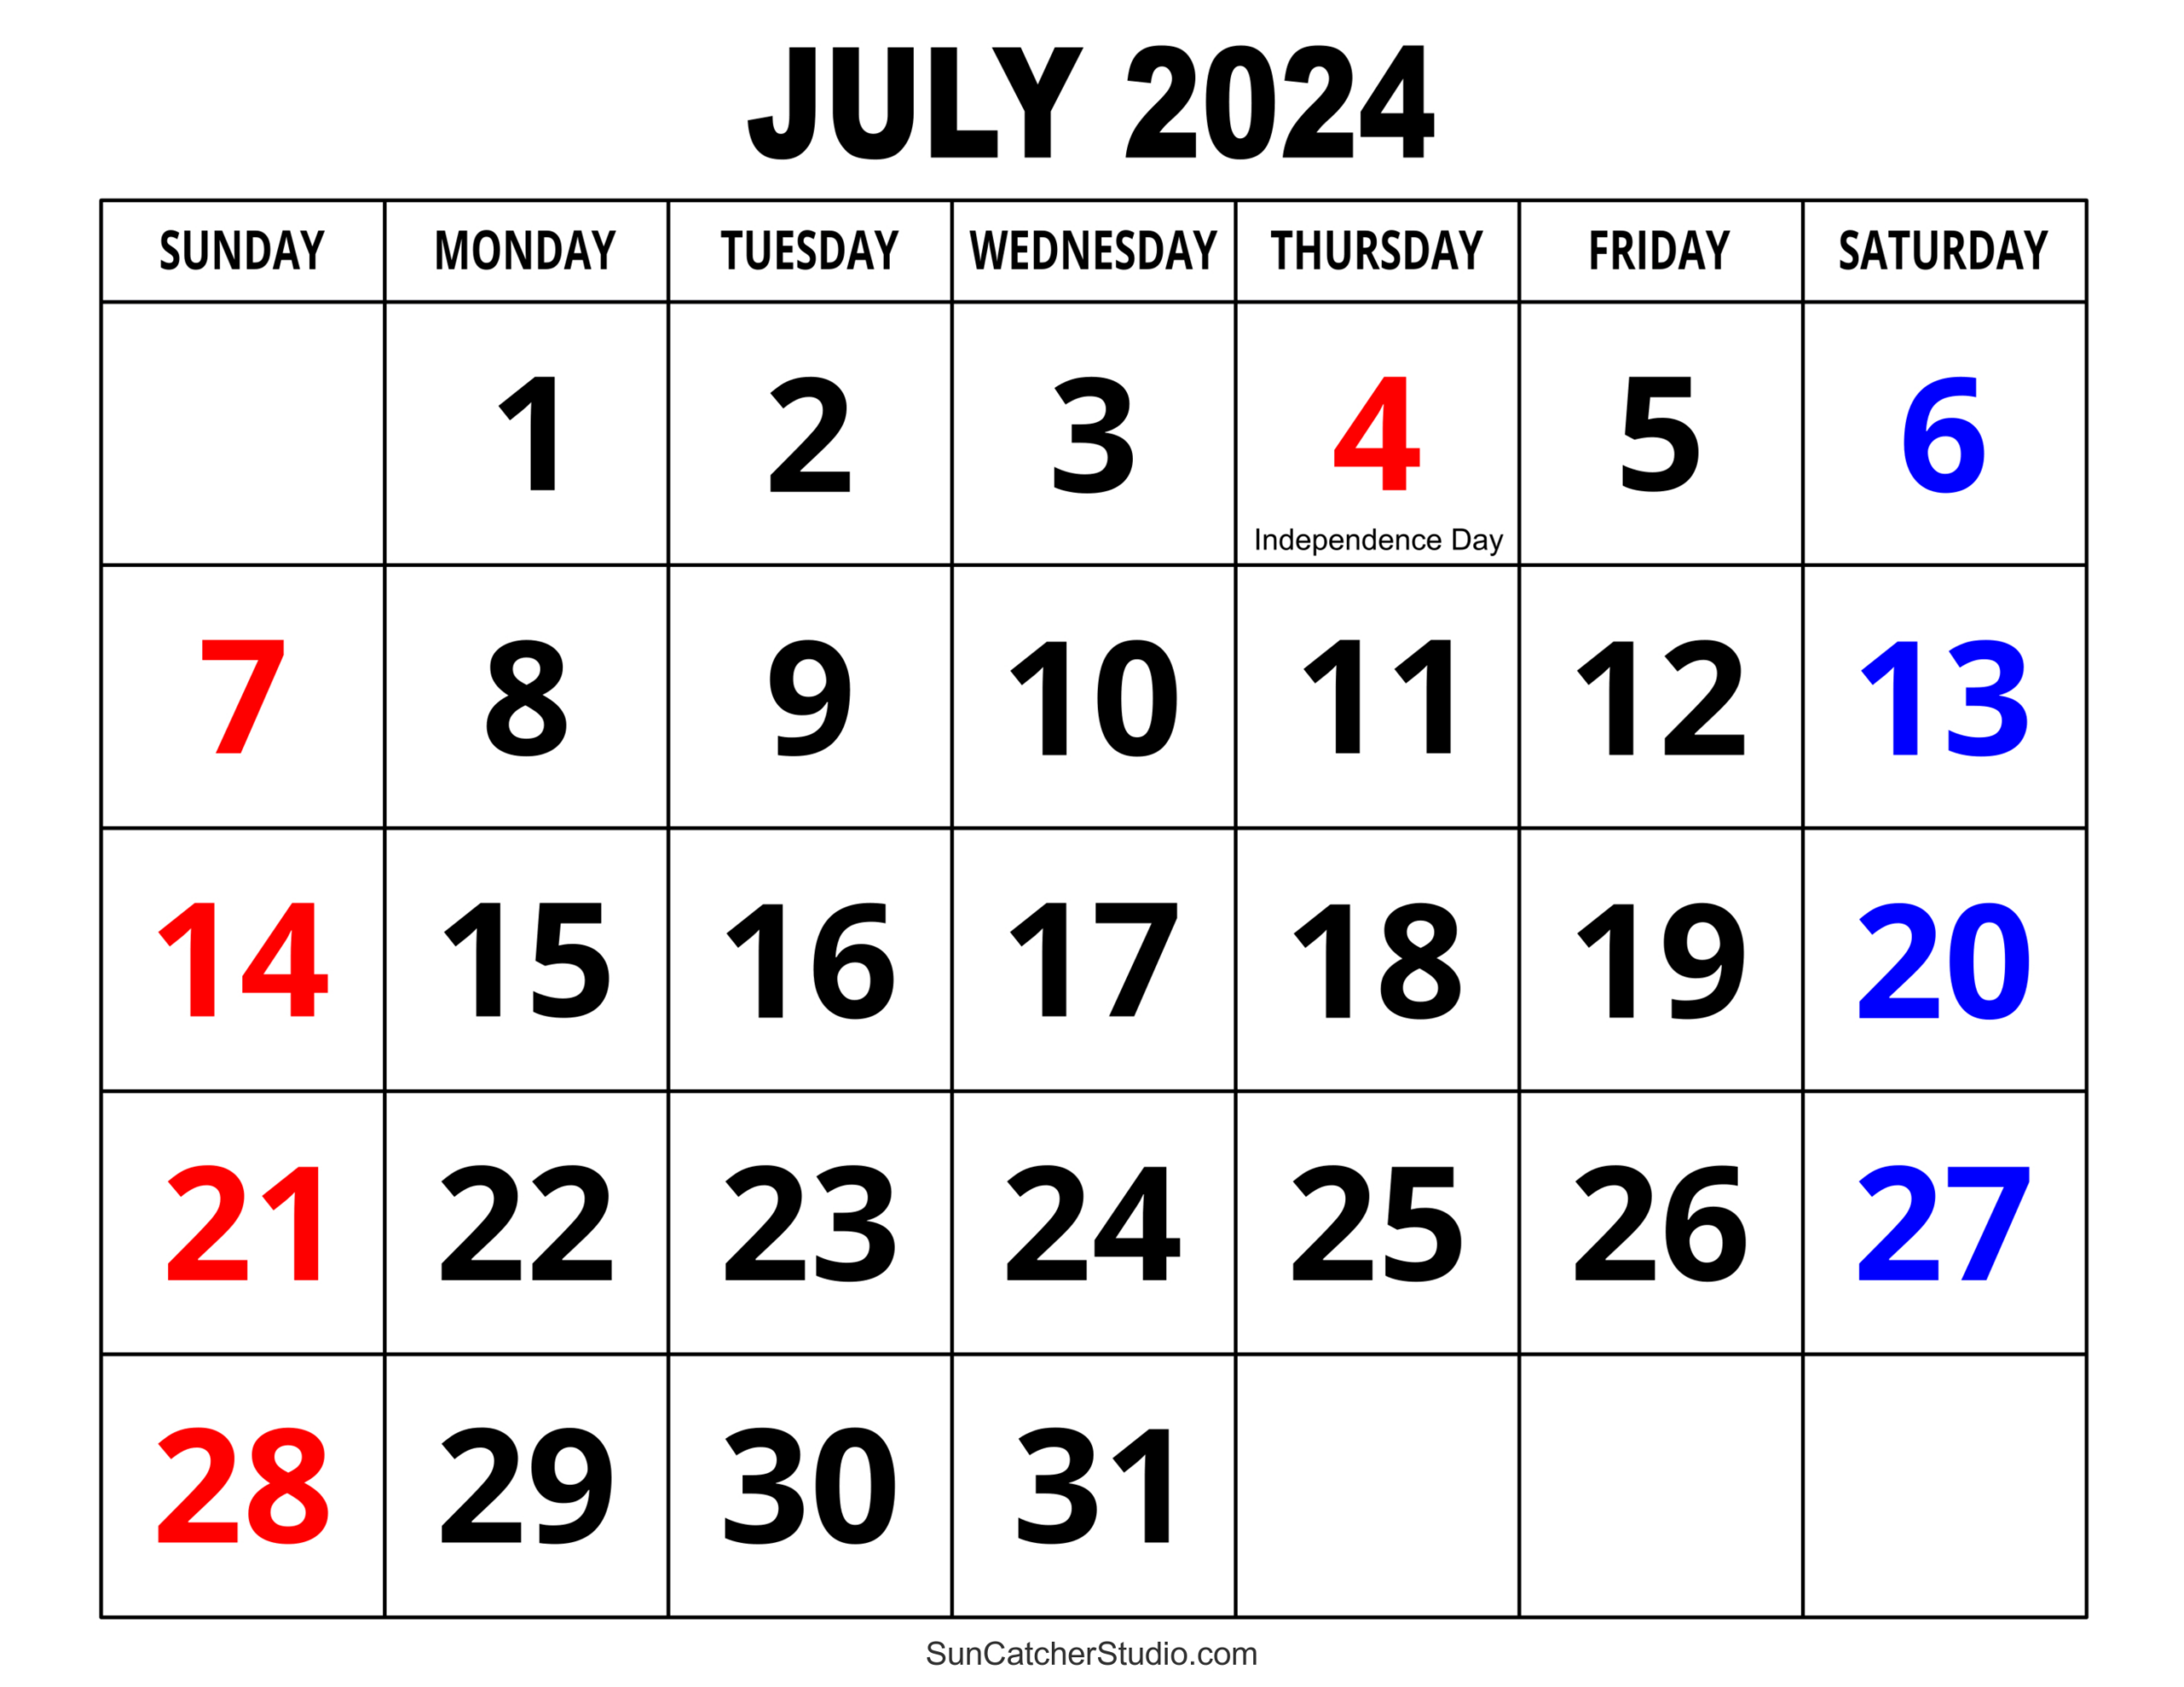 July 2024 Calendar (Free Printable) – Diy Projects, Patterns | Free Printable July Calendar 2024 With Holidays